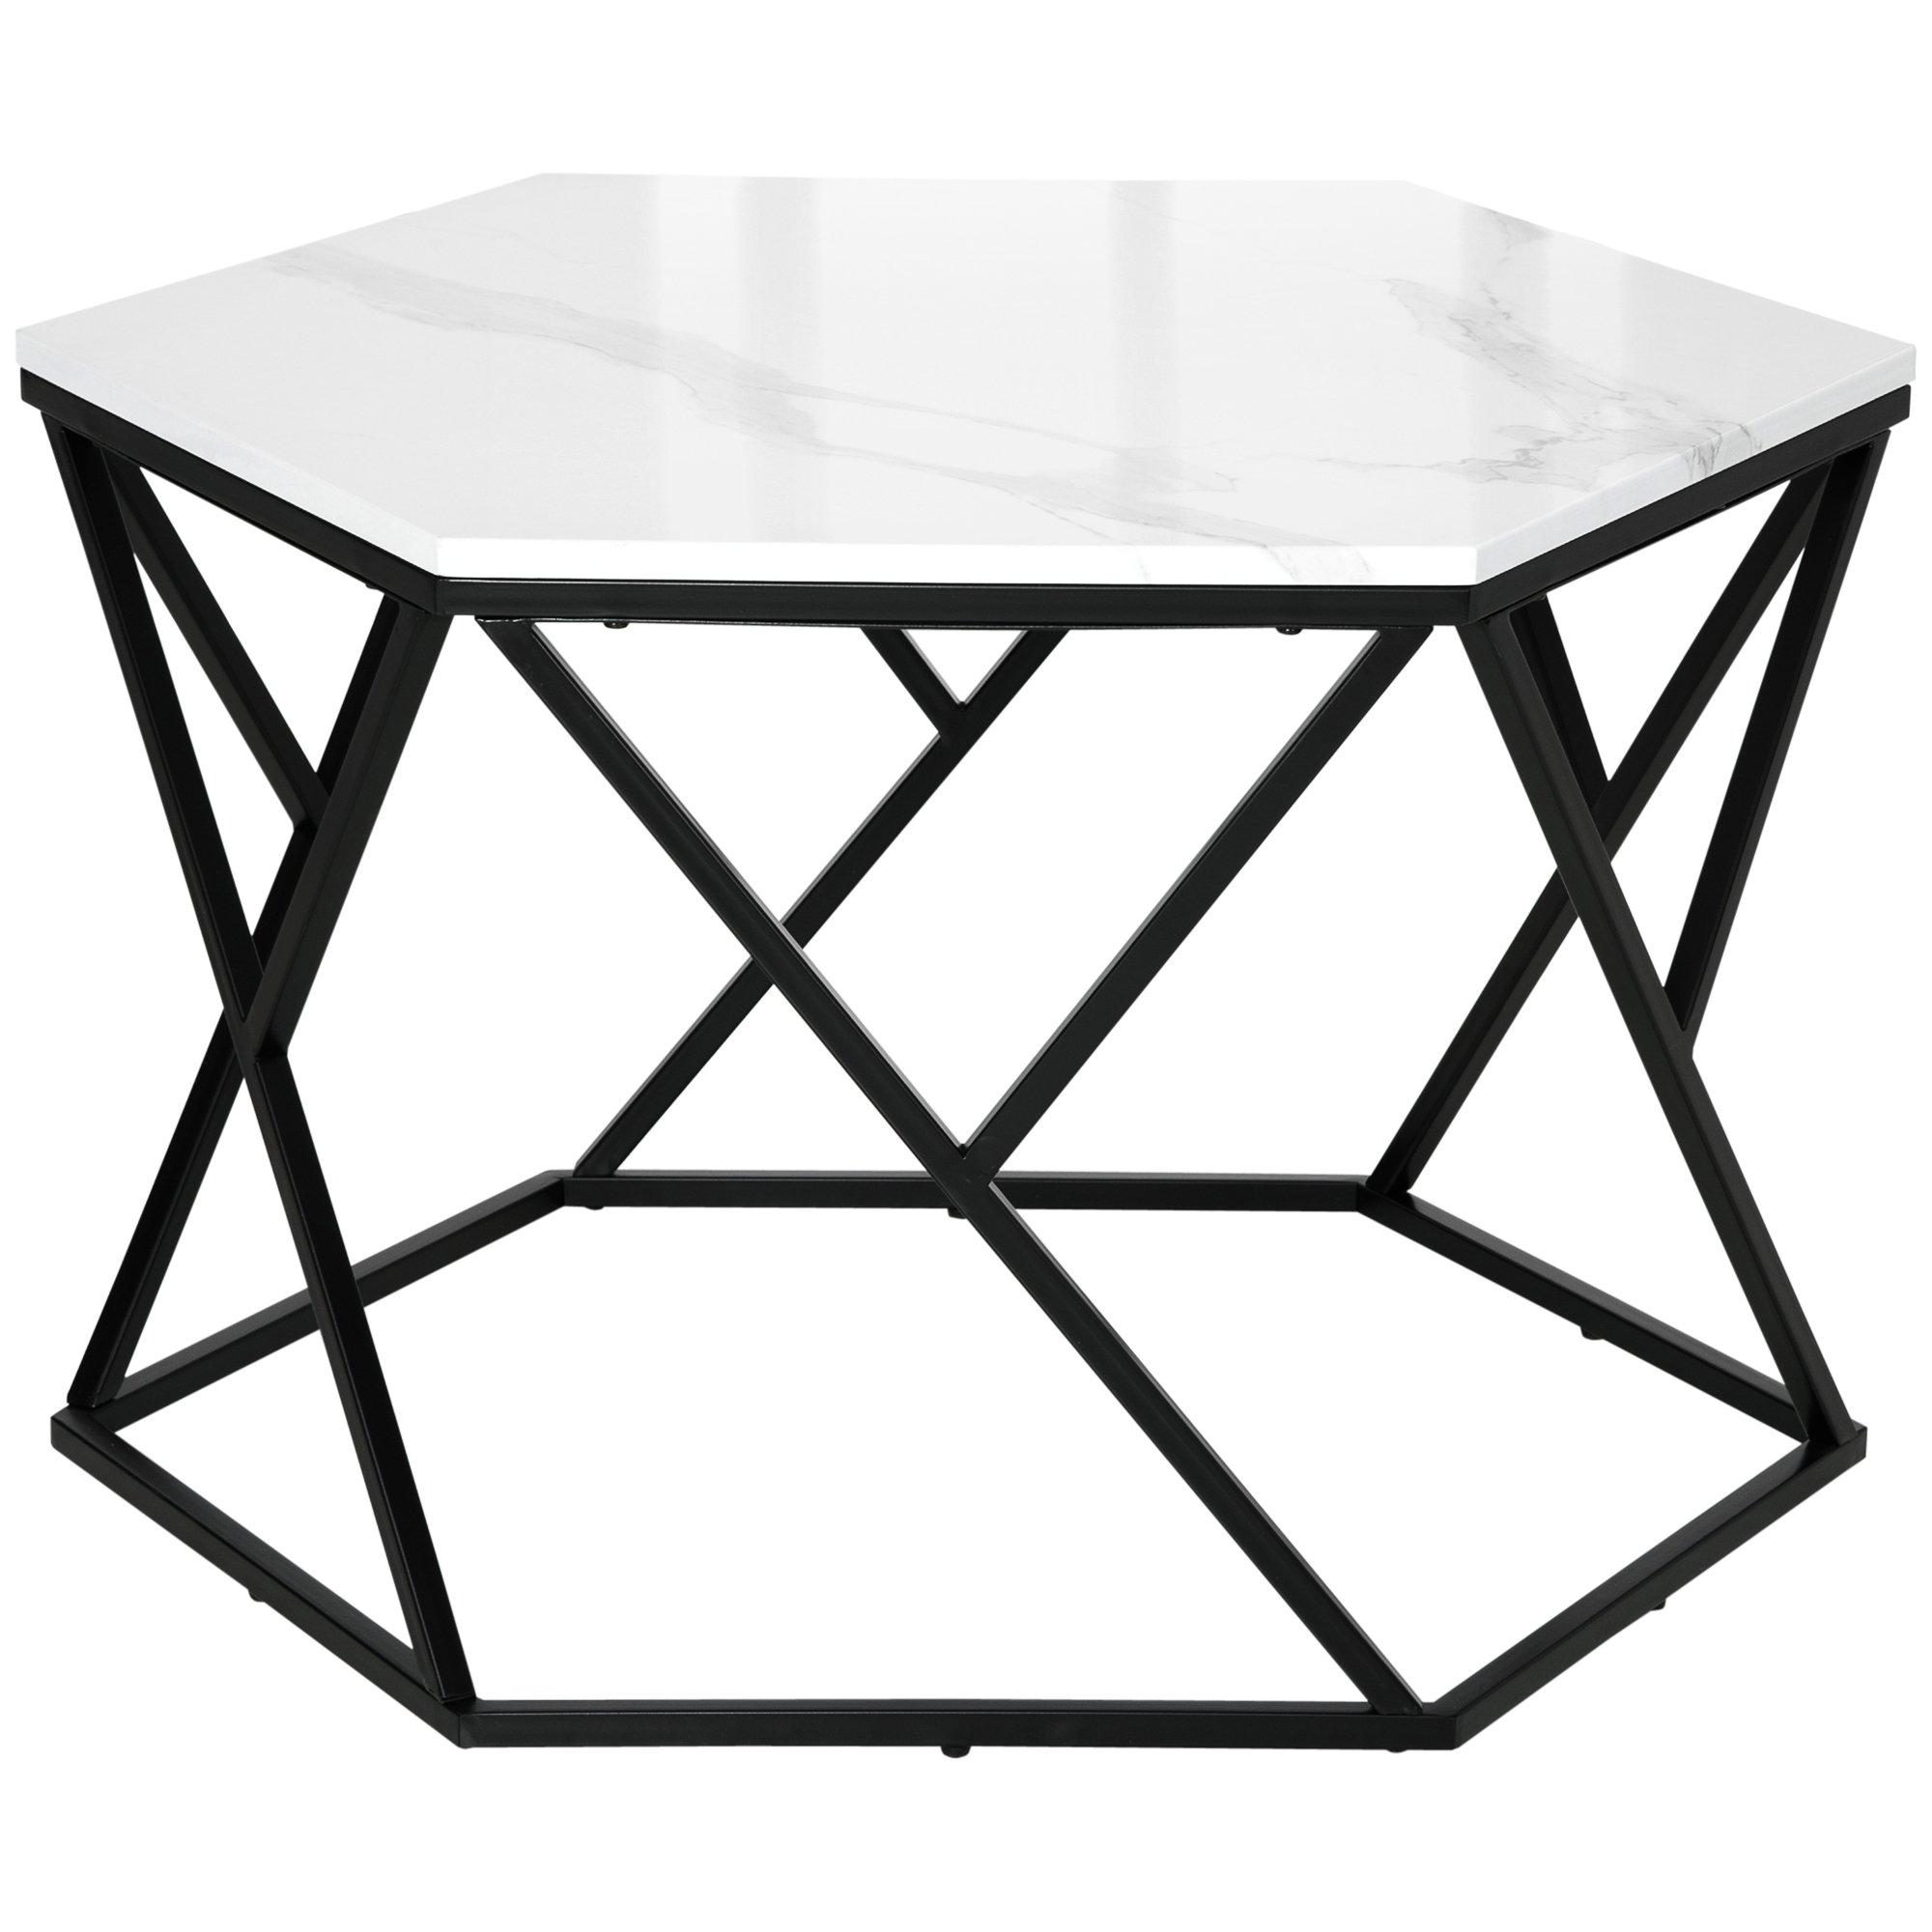 Modern Coffee Table with High Gloss Marble Effect Tabletop Steel Frame White